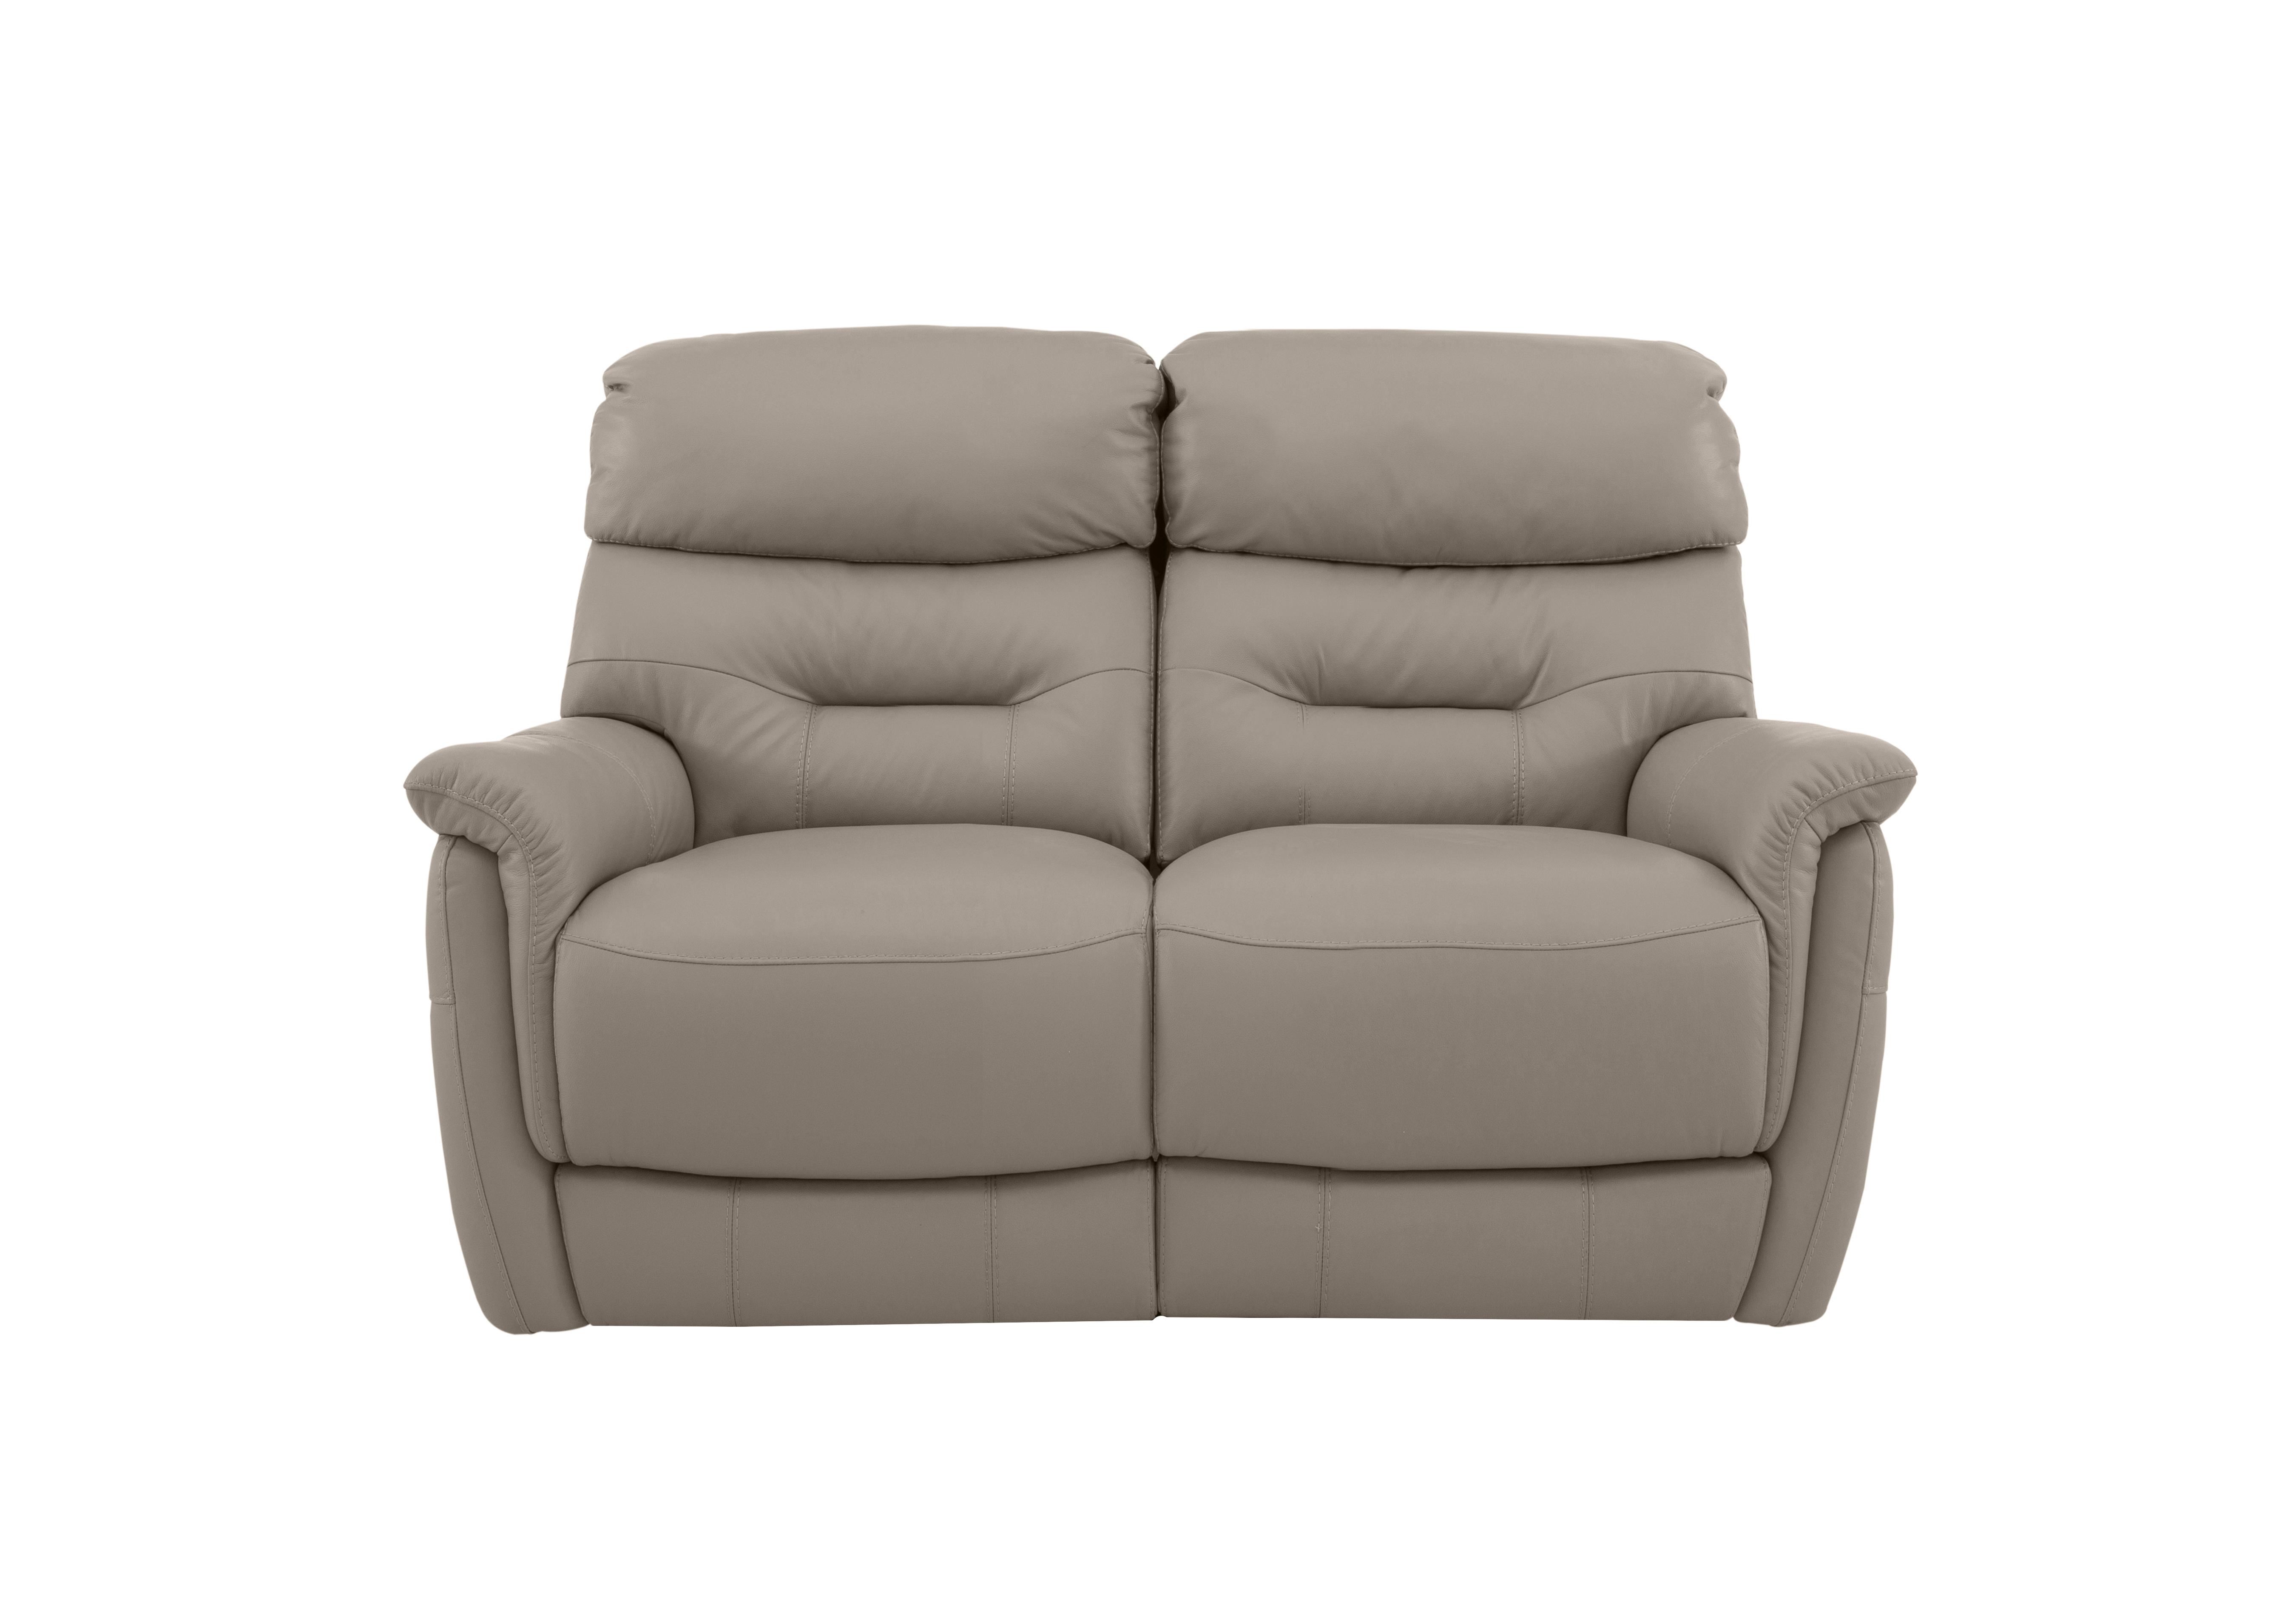 Chicago 2 Seater Leather Sofa in An-946b Silver Grey on Furniture Village